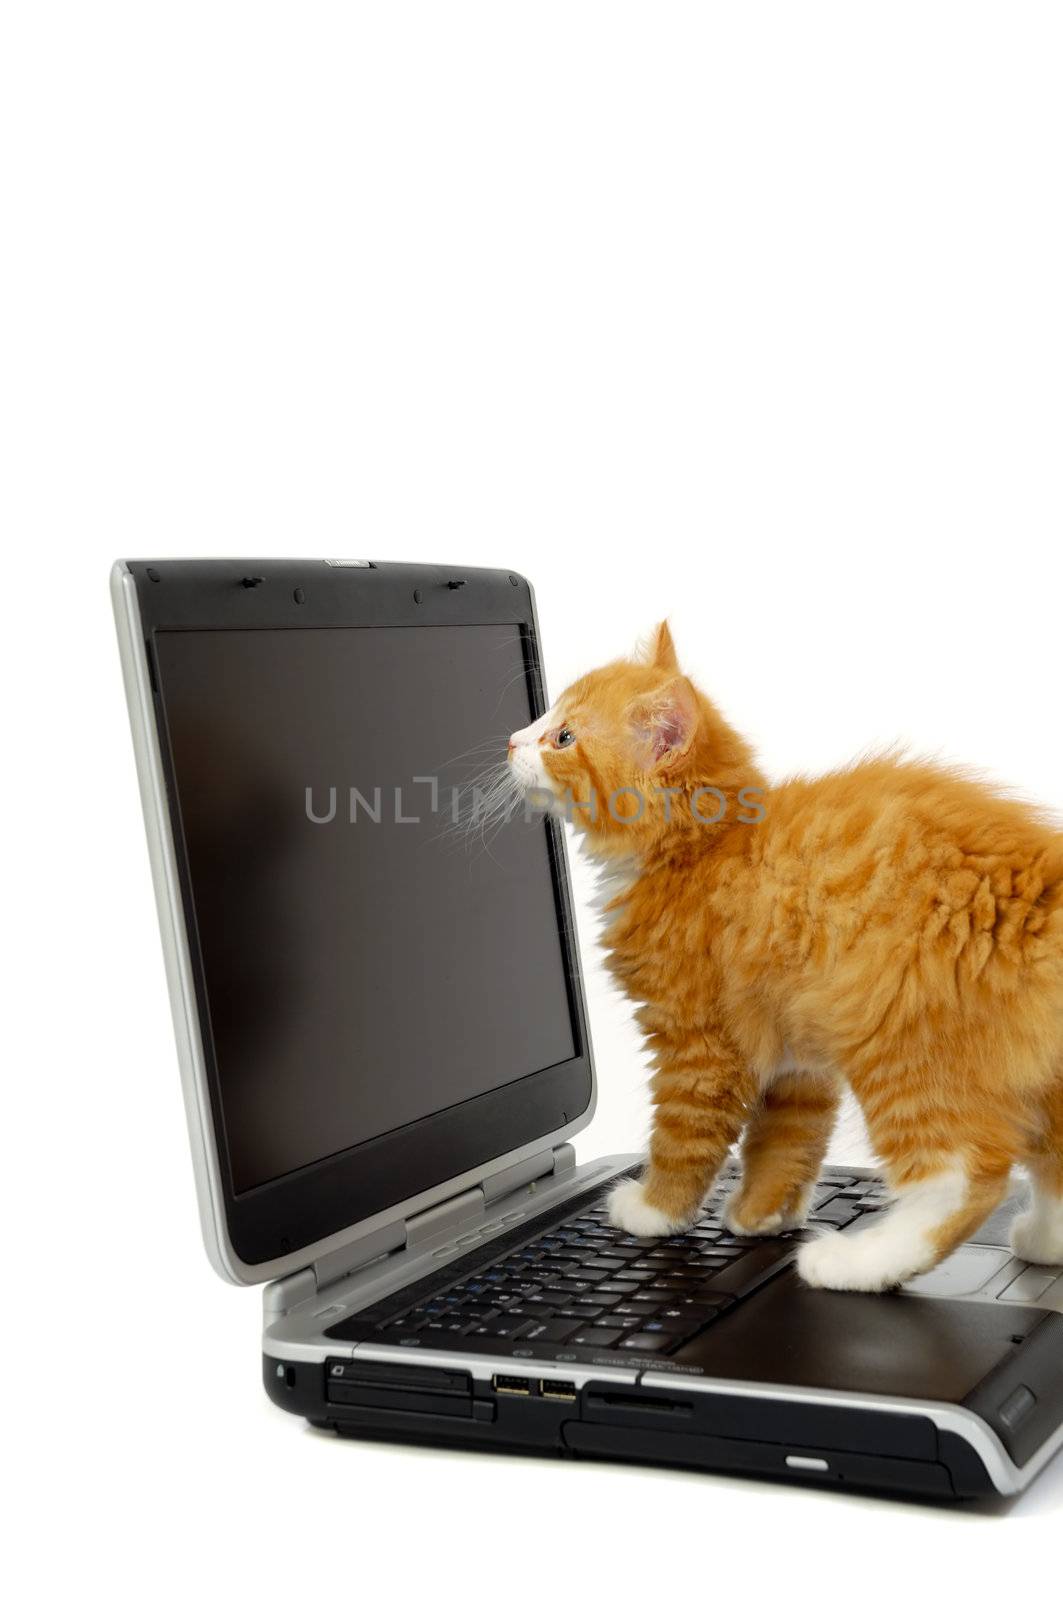 Sweet kitten is looking at the screen on a laptop. Taken on a white background.